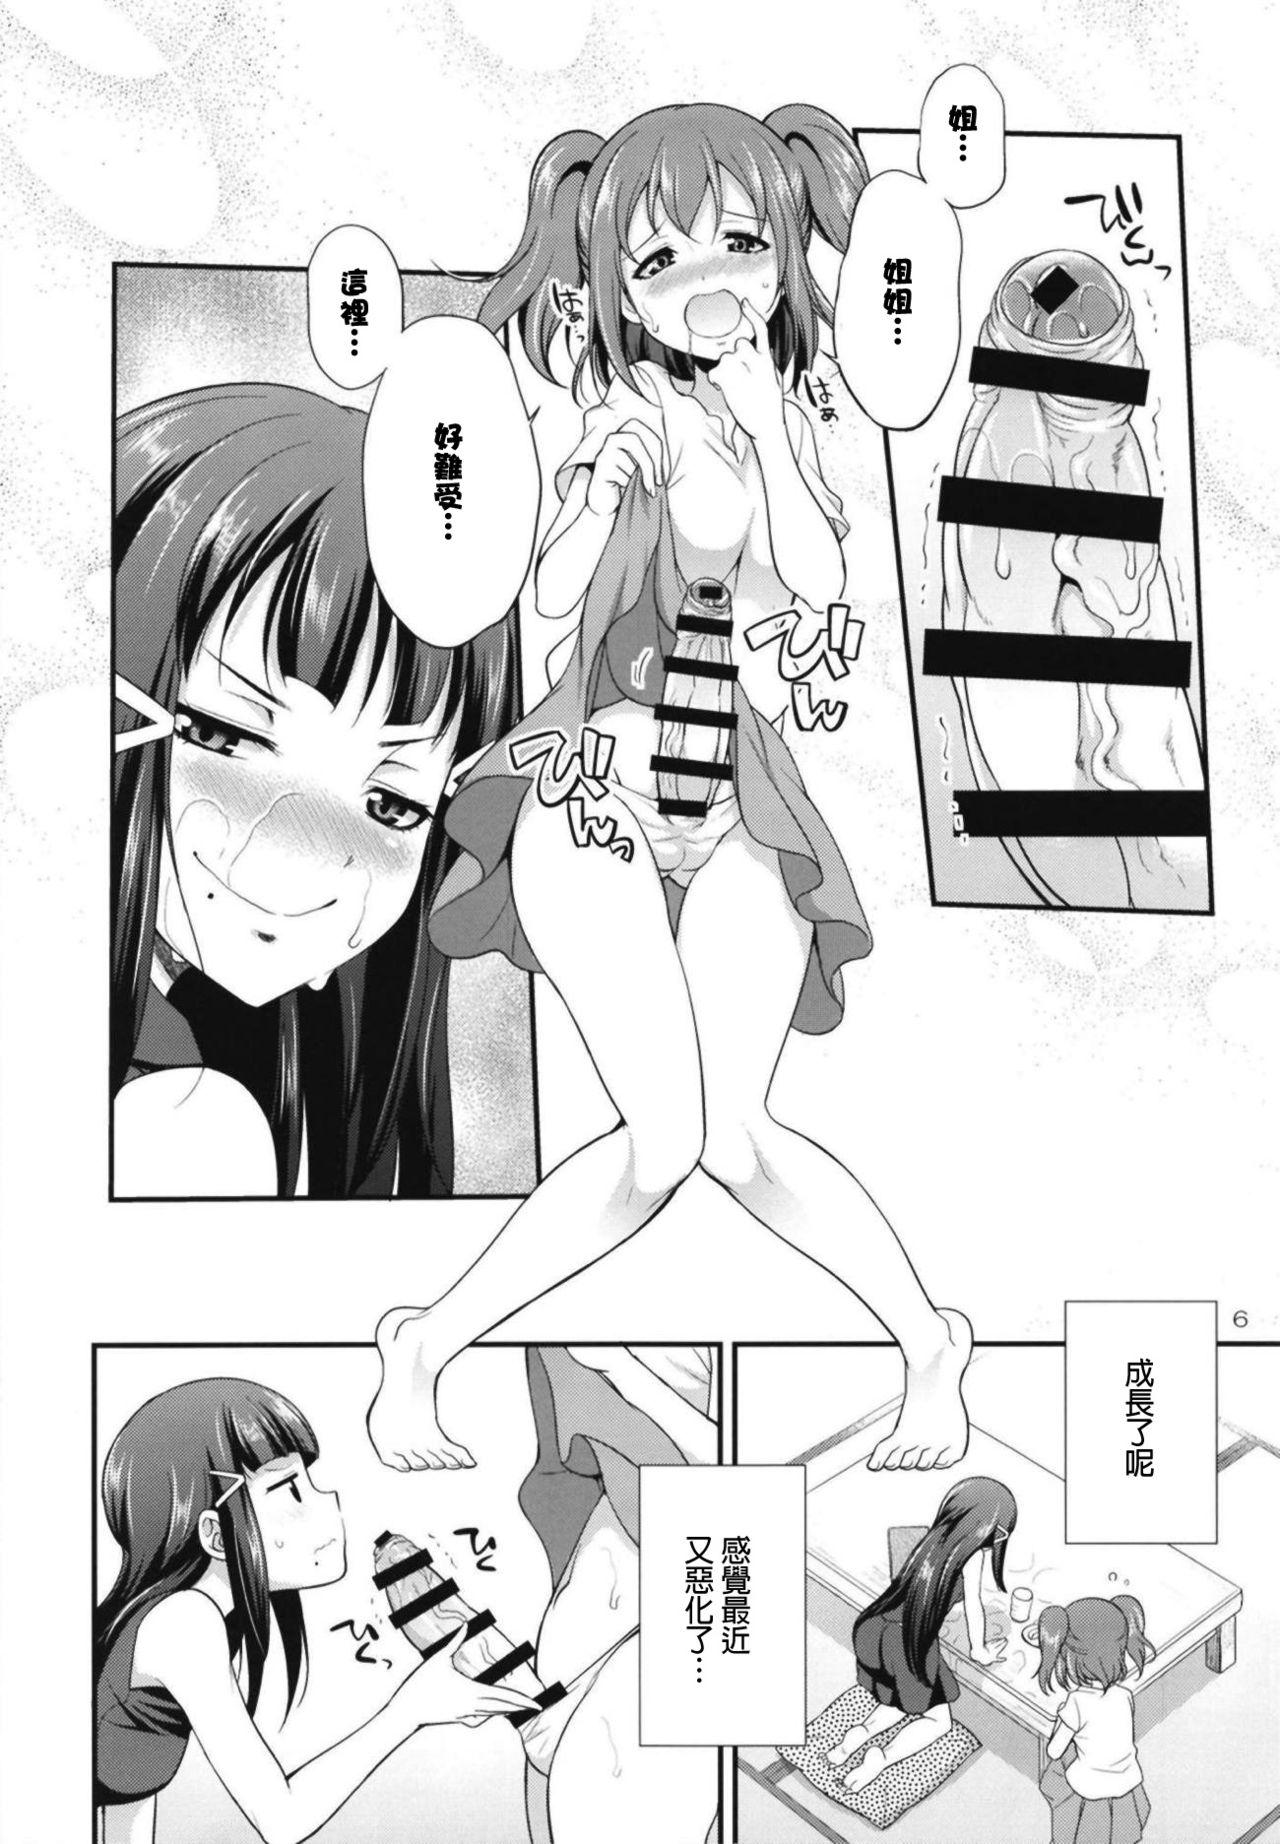 Gay Hairy FUTAqours side-dia&ruby - Love live sunshine Amature Allure - Page 6